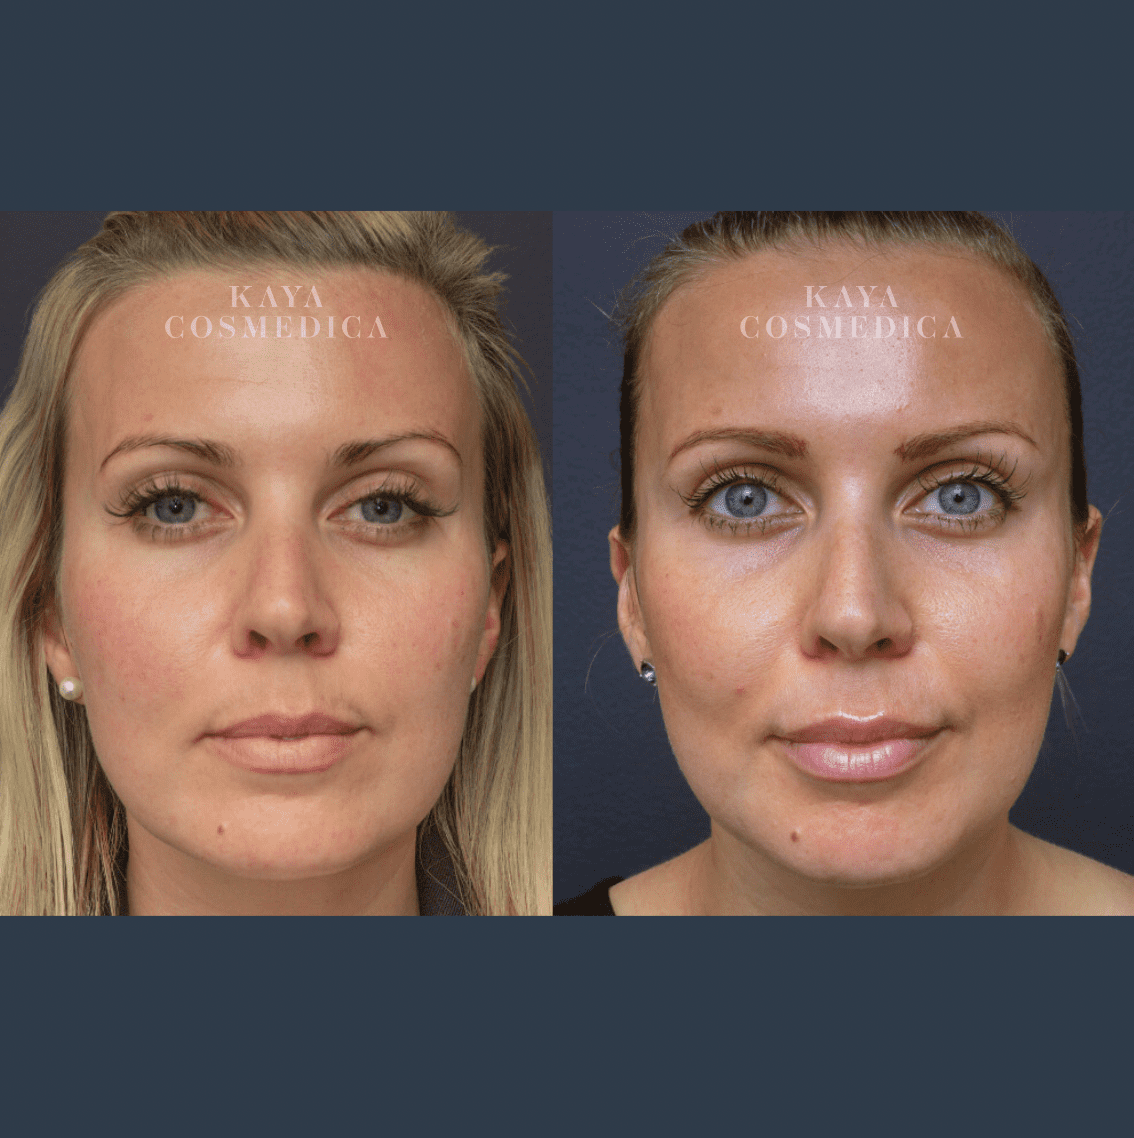 Before and after photos of a woman's face displaying dermal filler results. The left image shows her with minimal makeup, and the right image shows her with enhanced features and fuller lips.